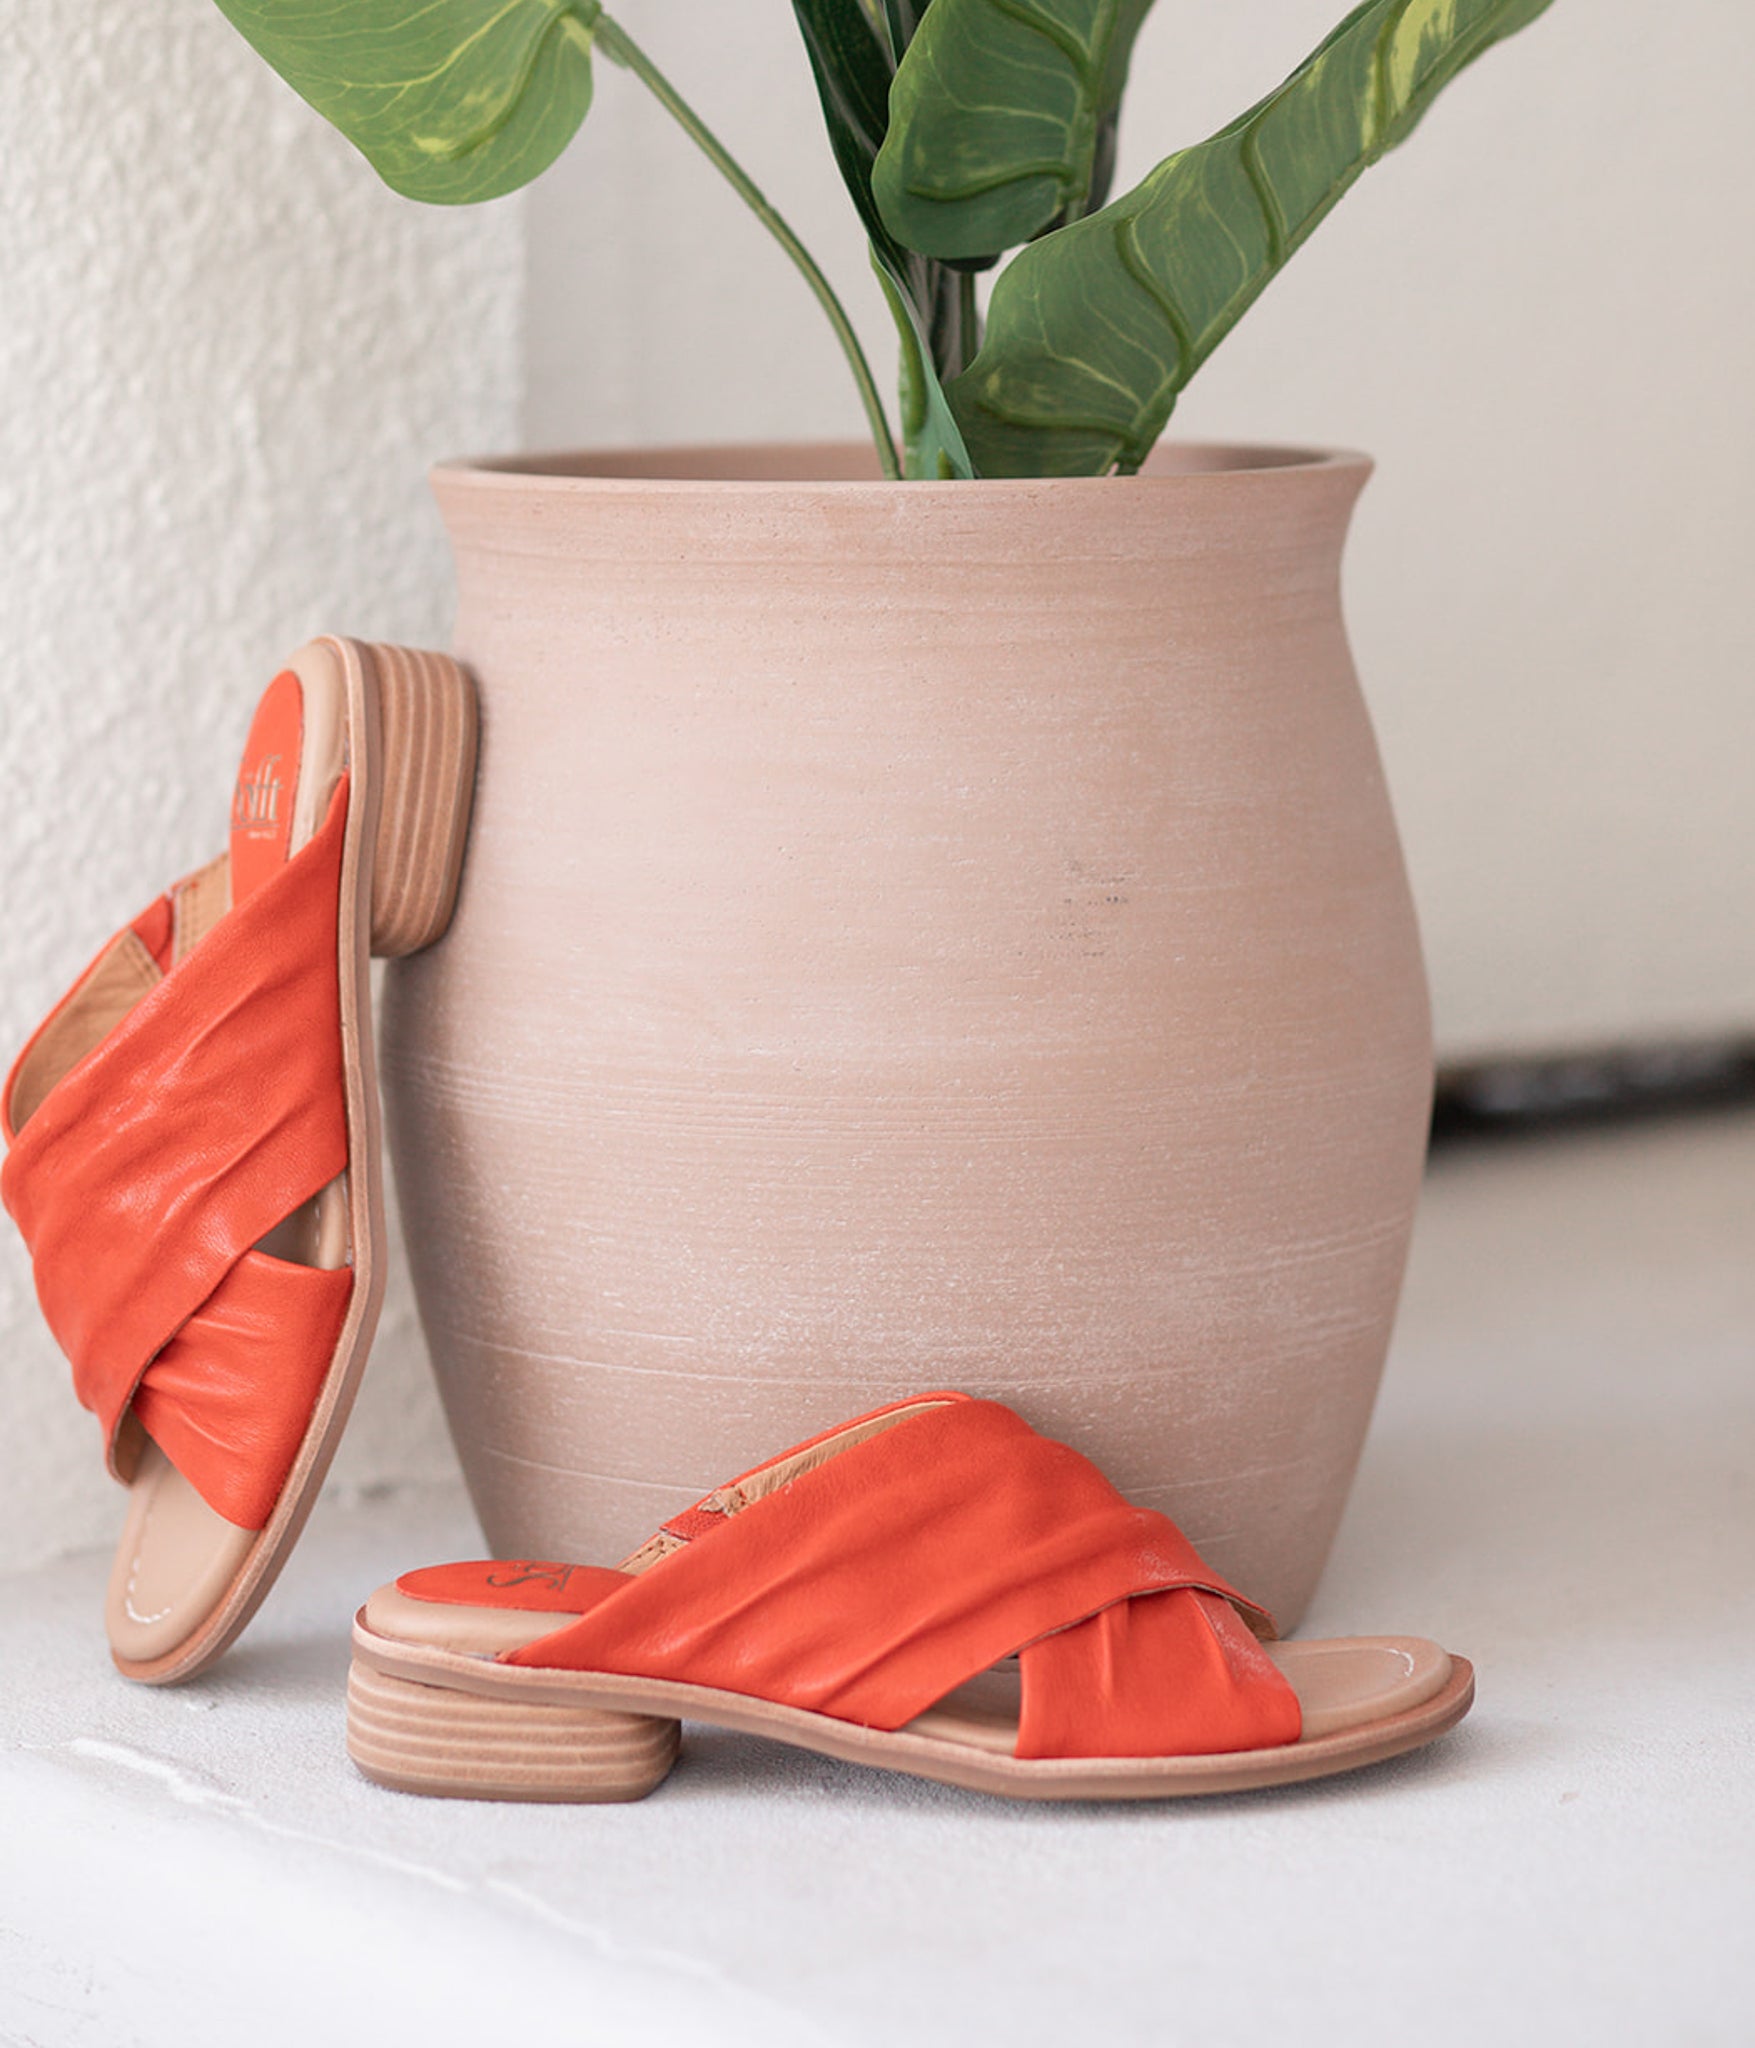 Fallon Leather Slide Sandal in Coral by Sofft Shoes